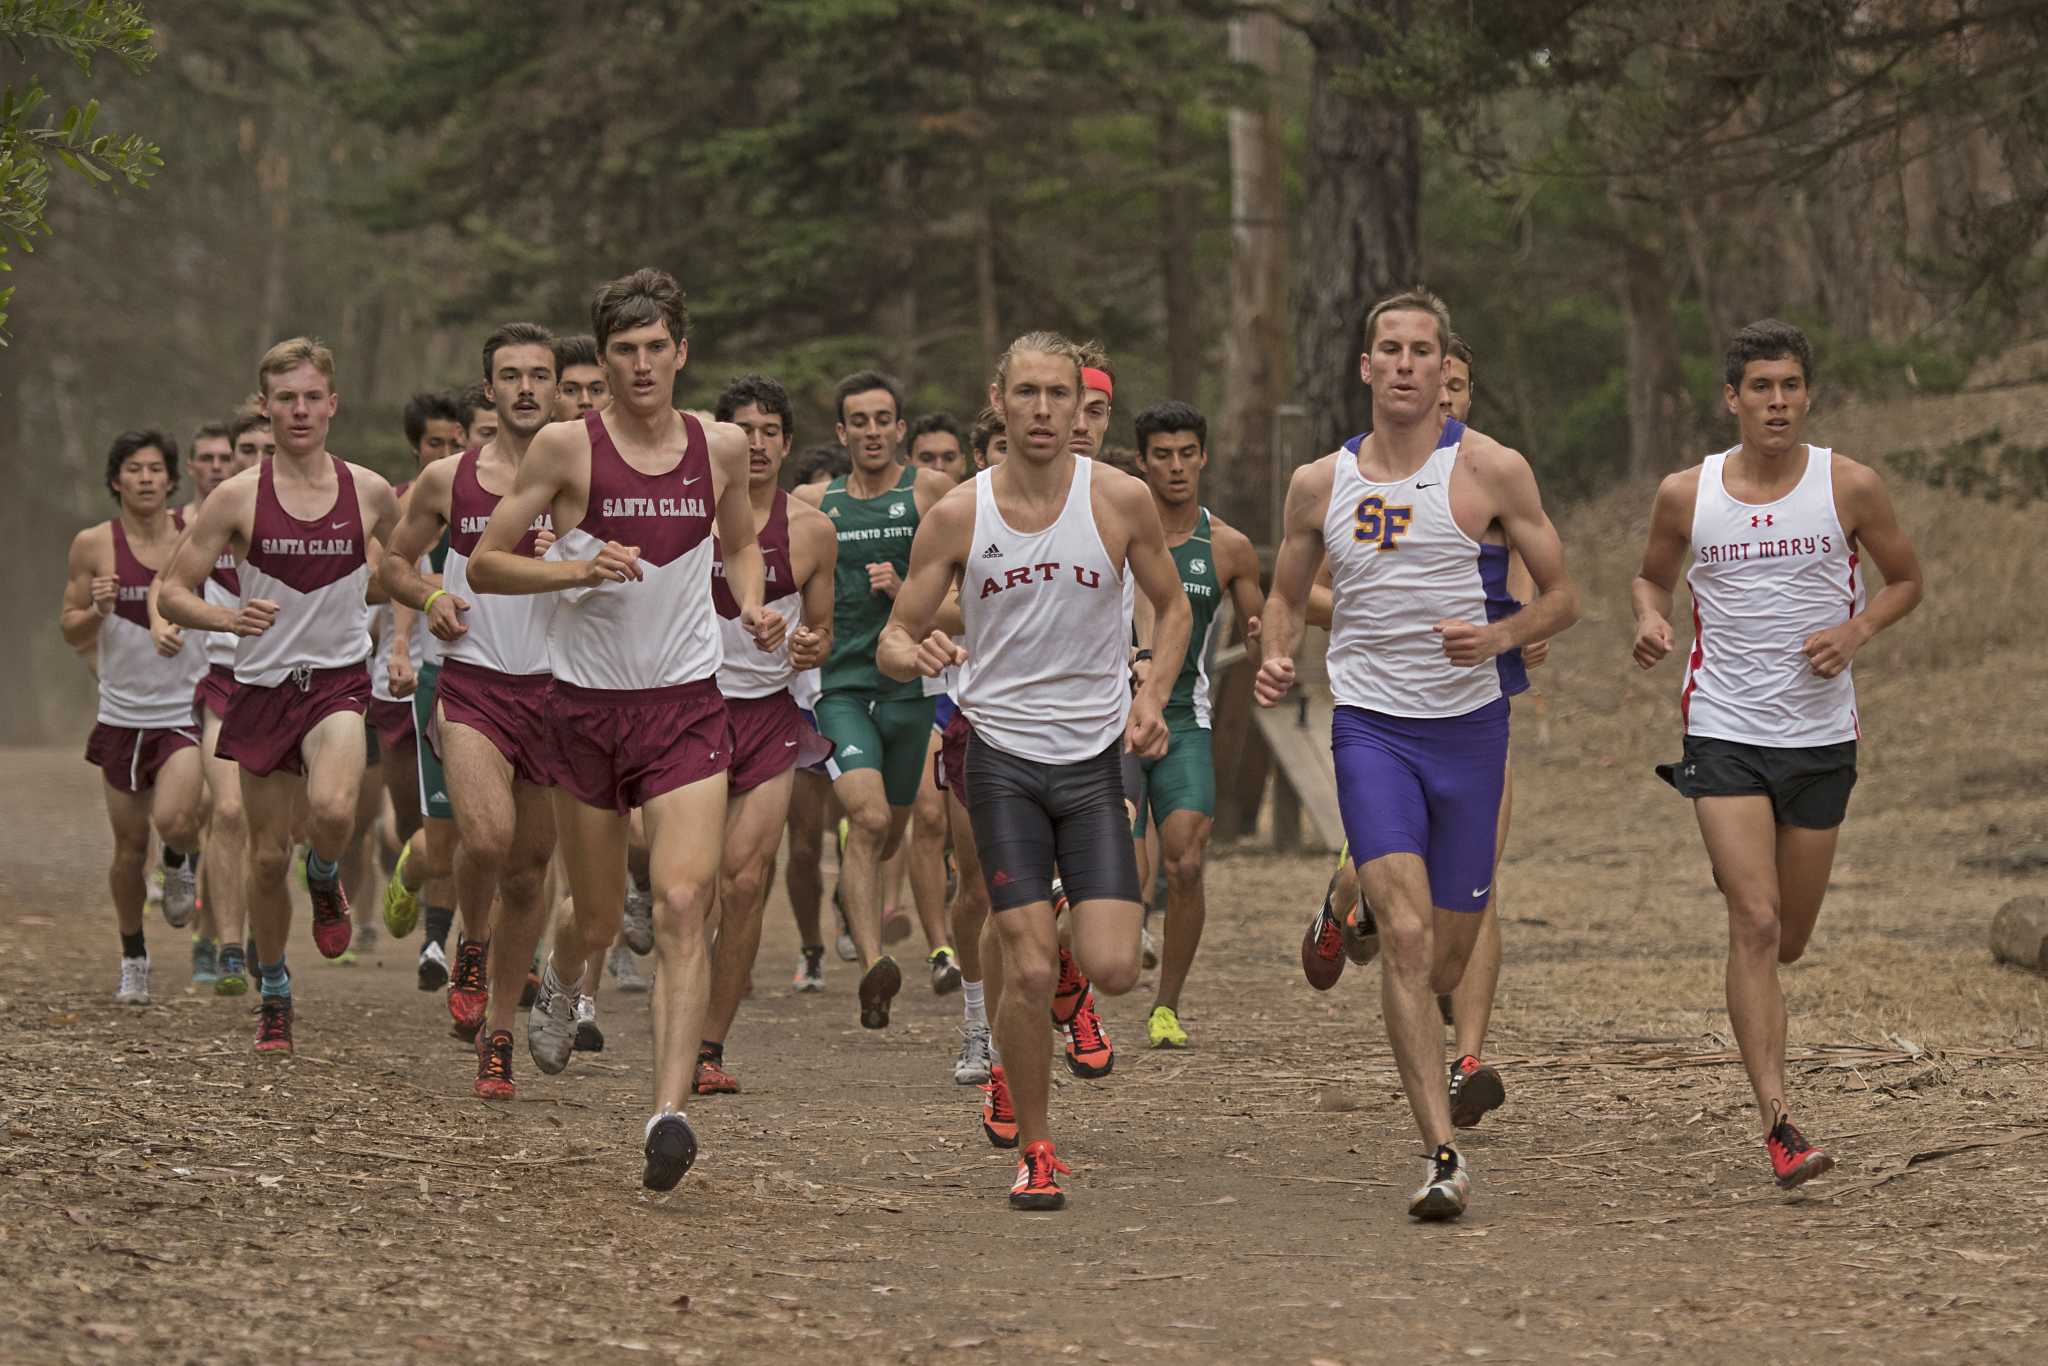 SF State Gators junior Drew Feldman leads the race during the second loop of the 7250 meter race at Hellman Hallow Meadow in Golden Gate Park on Thursday, Sept. 15, 2016. Feldman finished the race in 4th place with a time of 23:18.00.